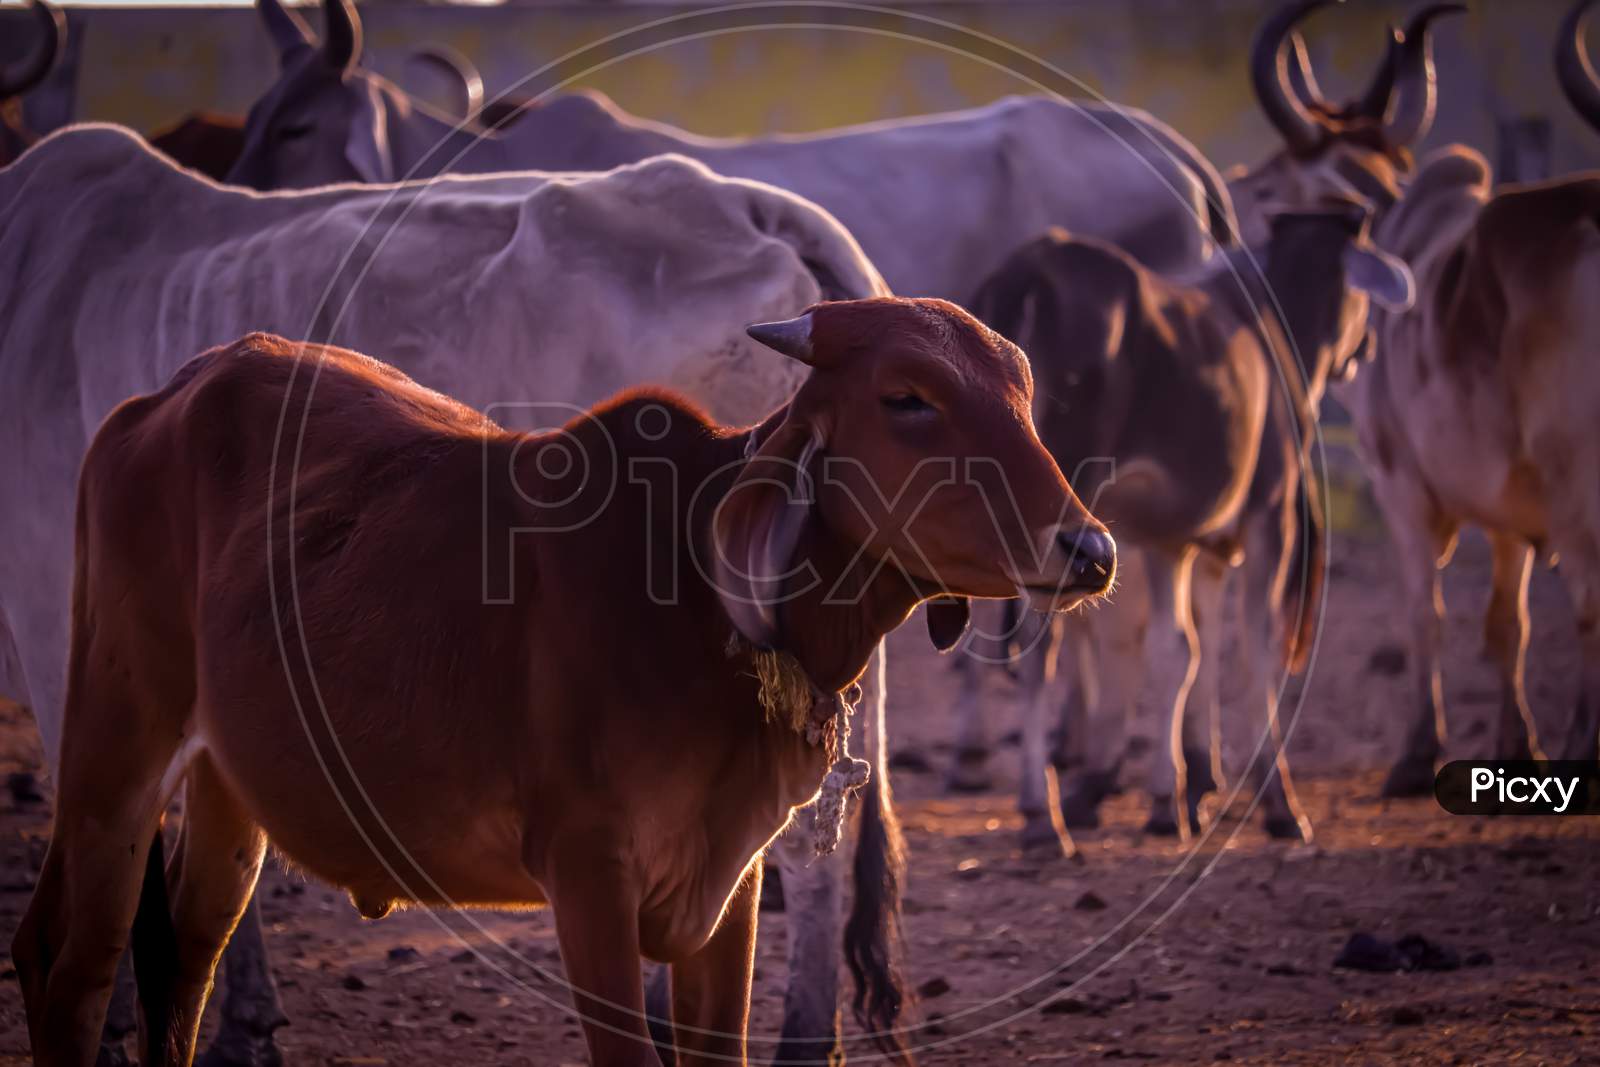 Cows Group At Rural House,Farming And Animal Husbandry Concept,Milk Production And Dairy Product Thai Cows Resting In A Field,Cows - Protective Shelters For Cows In Govshal, Selective Focus